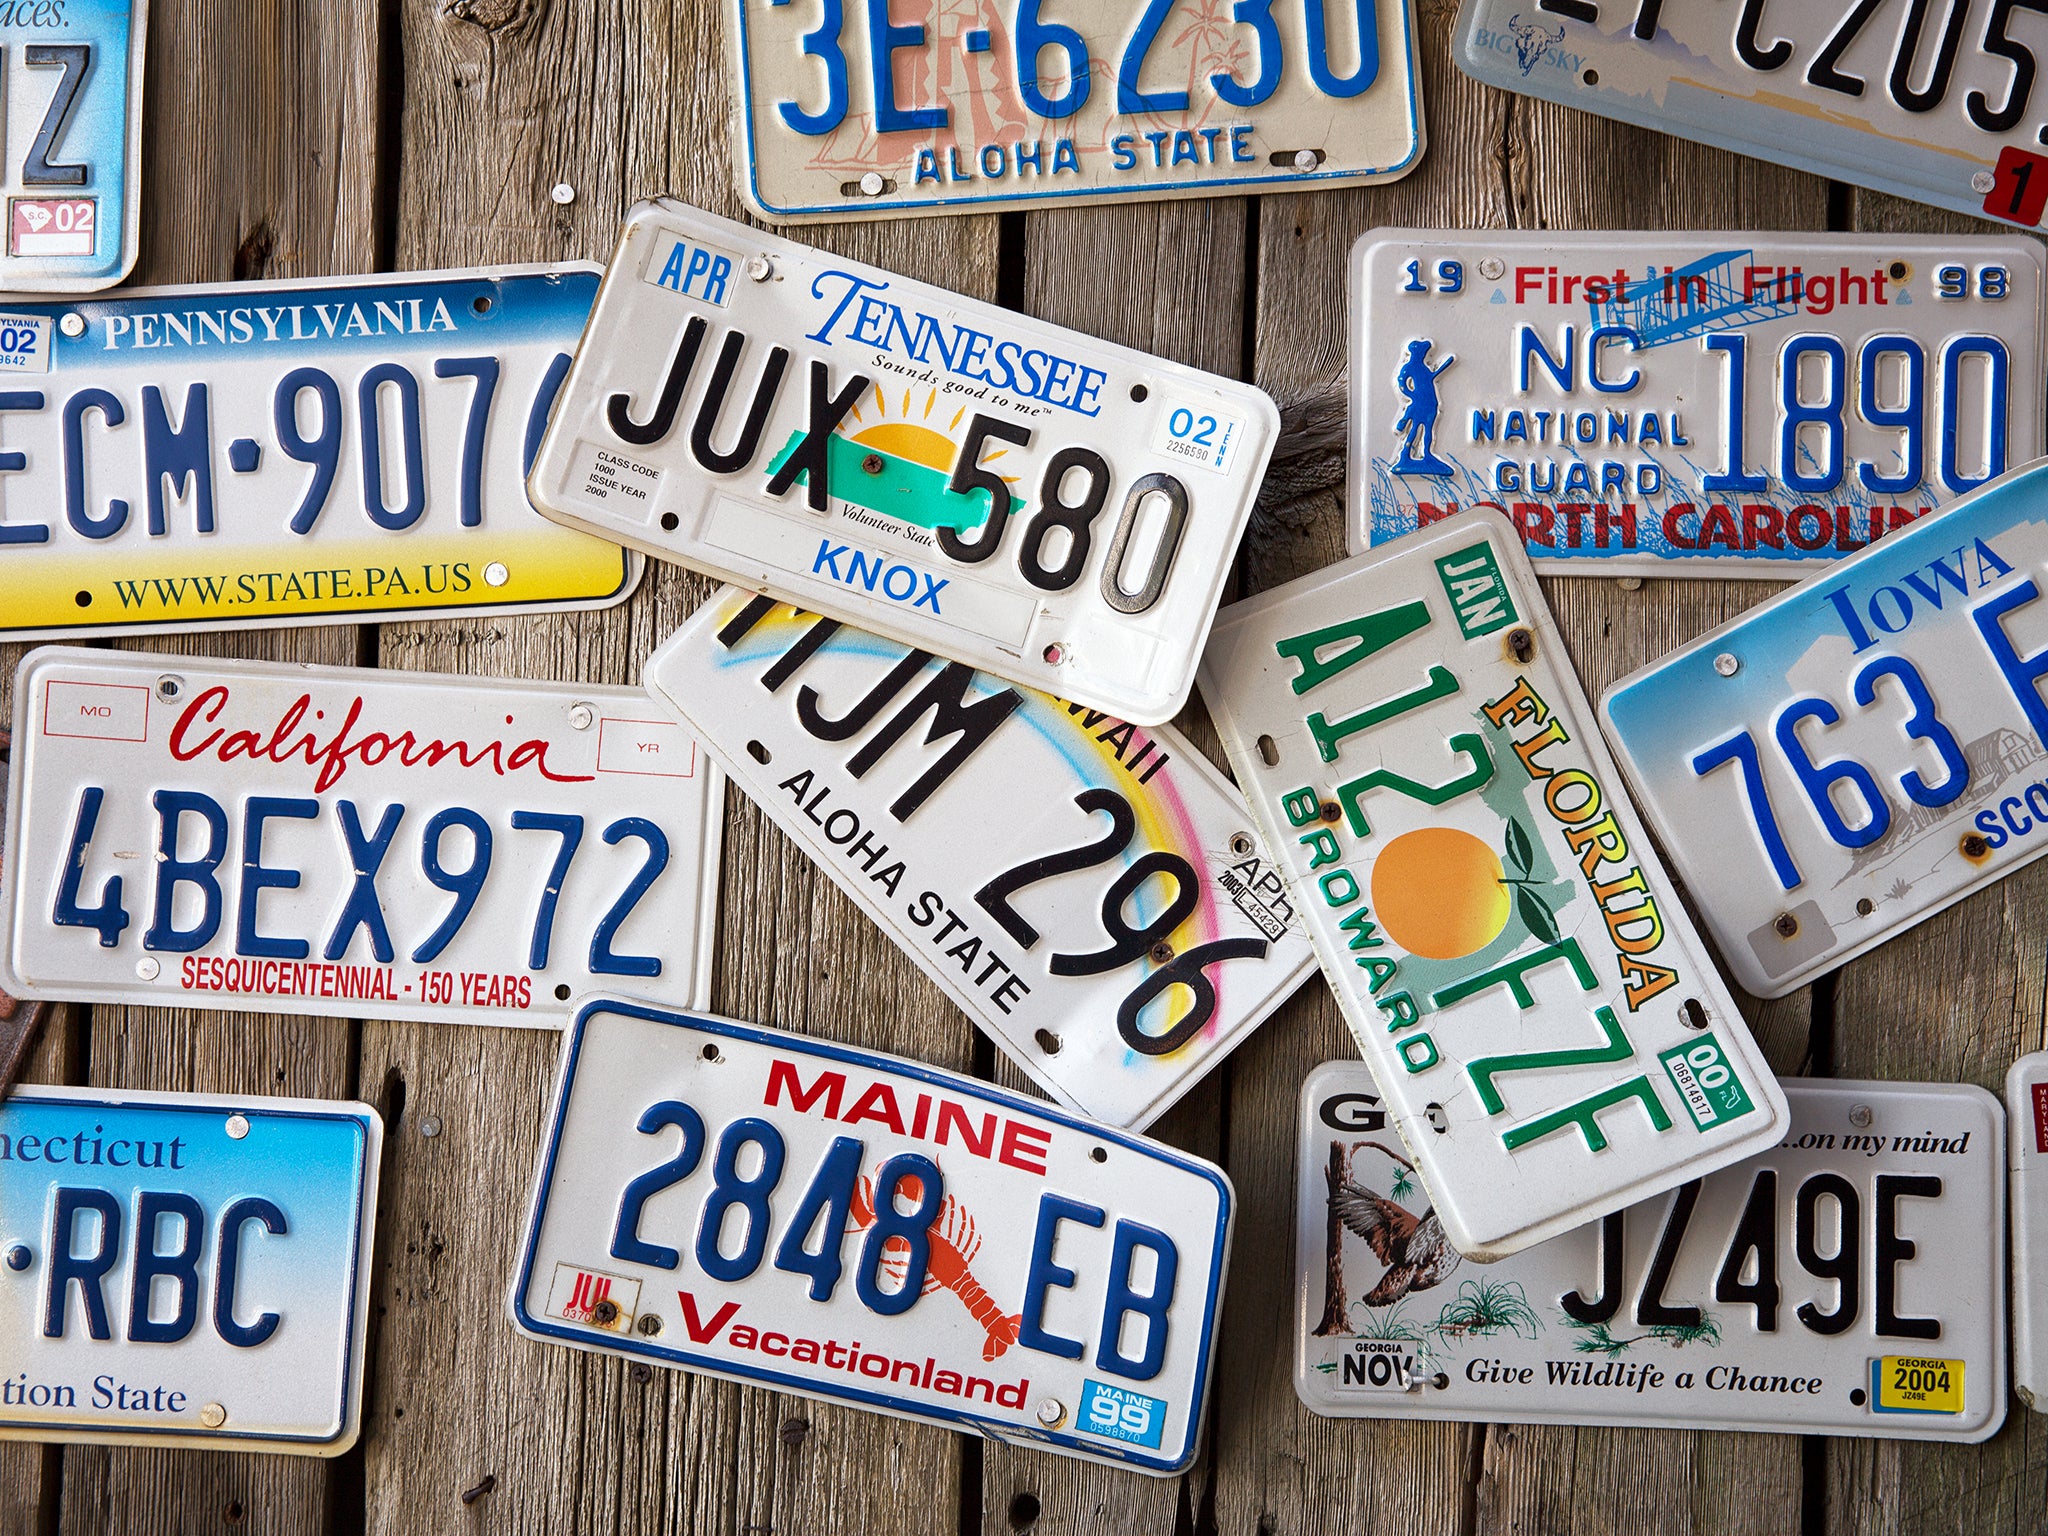 Coolest Things: 30 Licence Plates Wallpaper